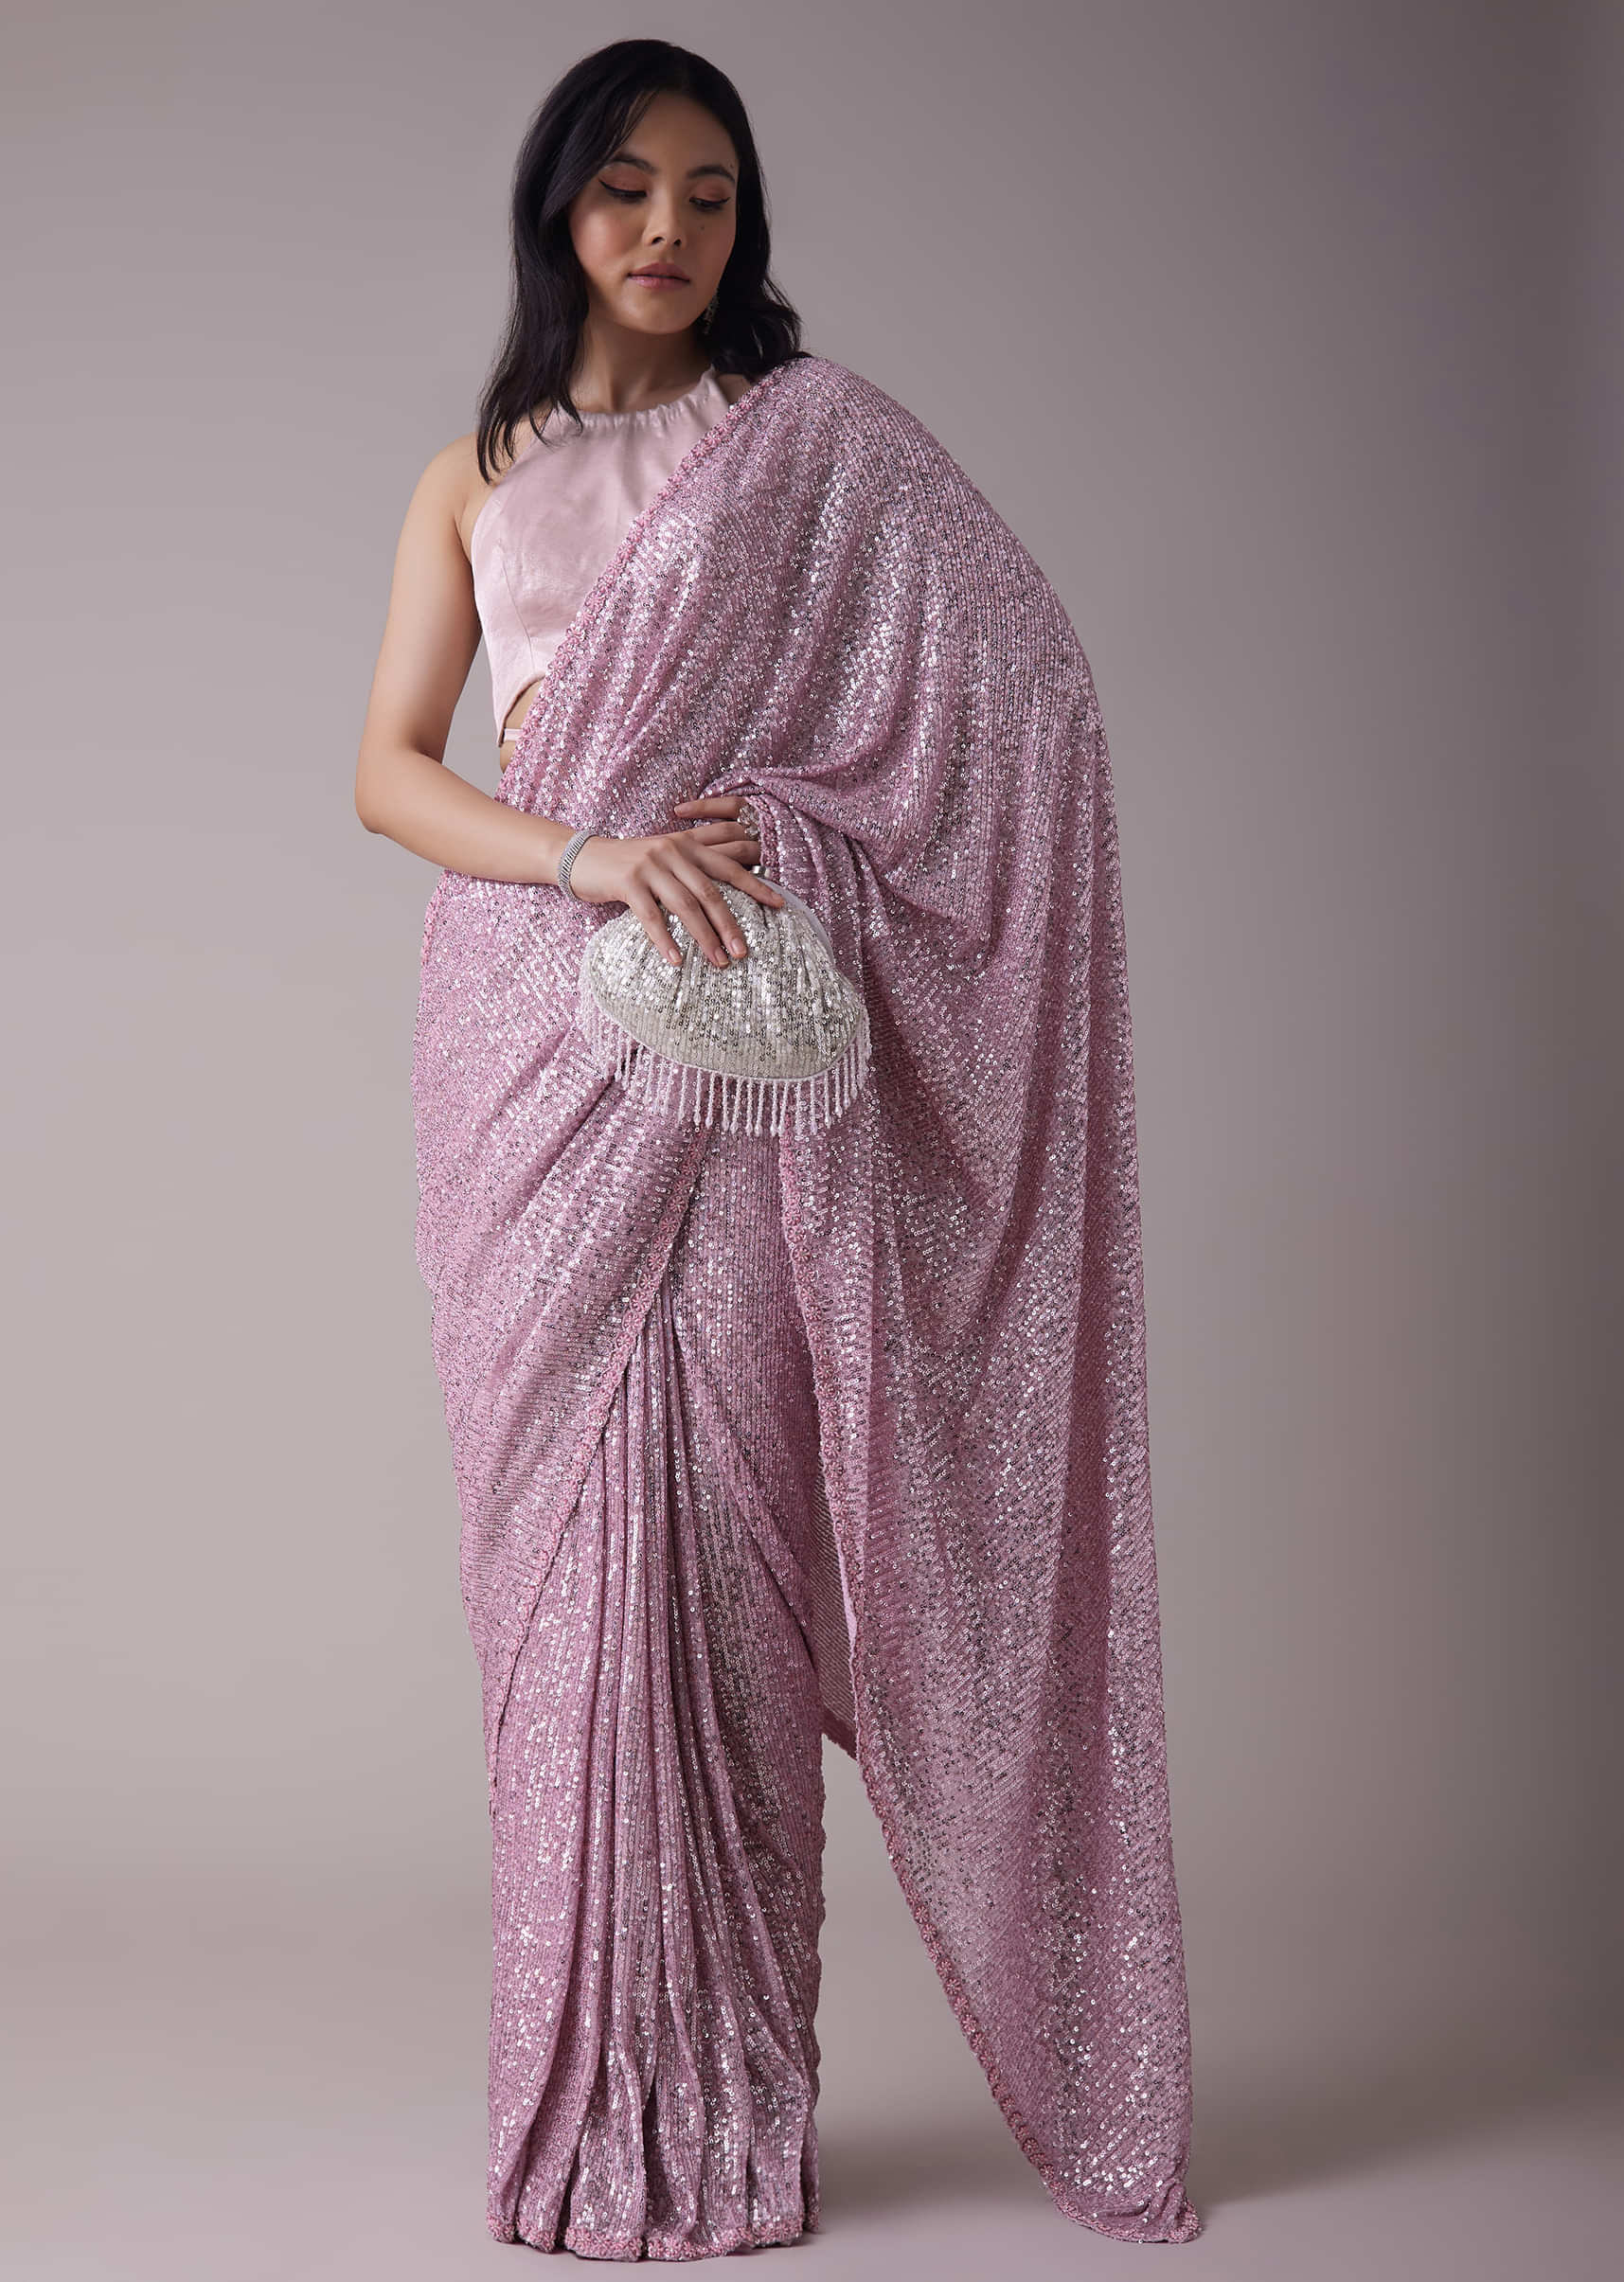 Lilac Purple Sequins Saree With An Embellished Border